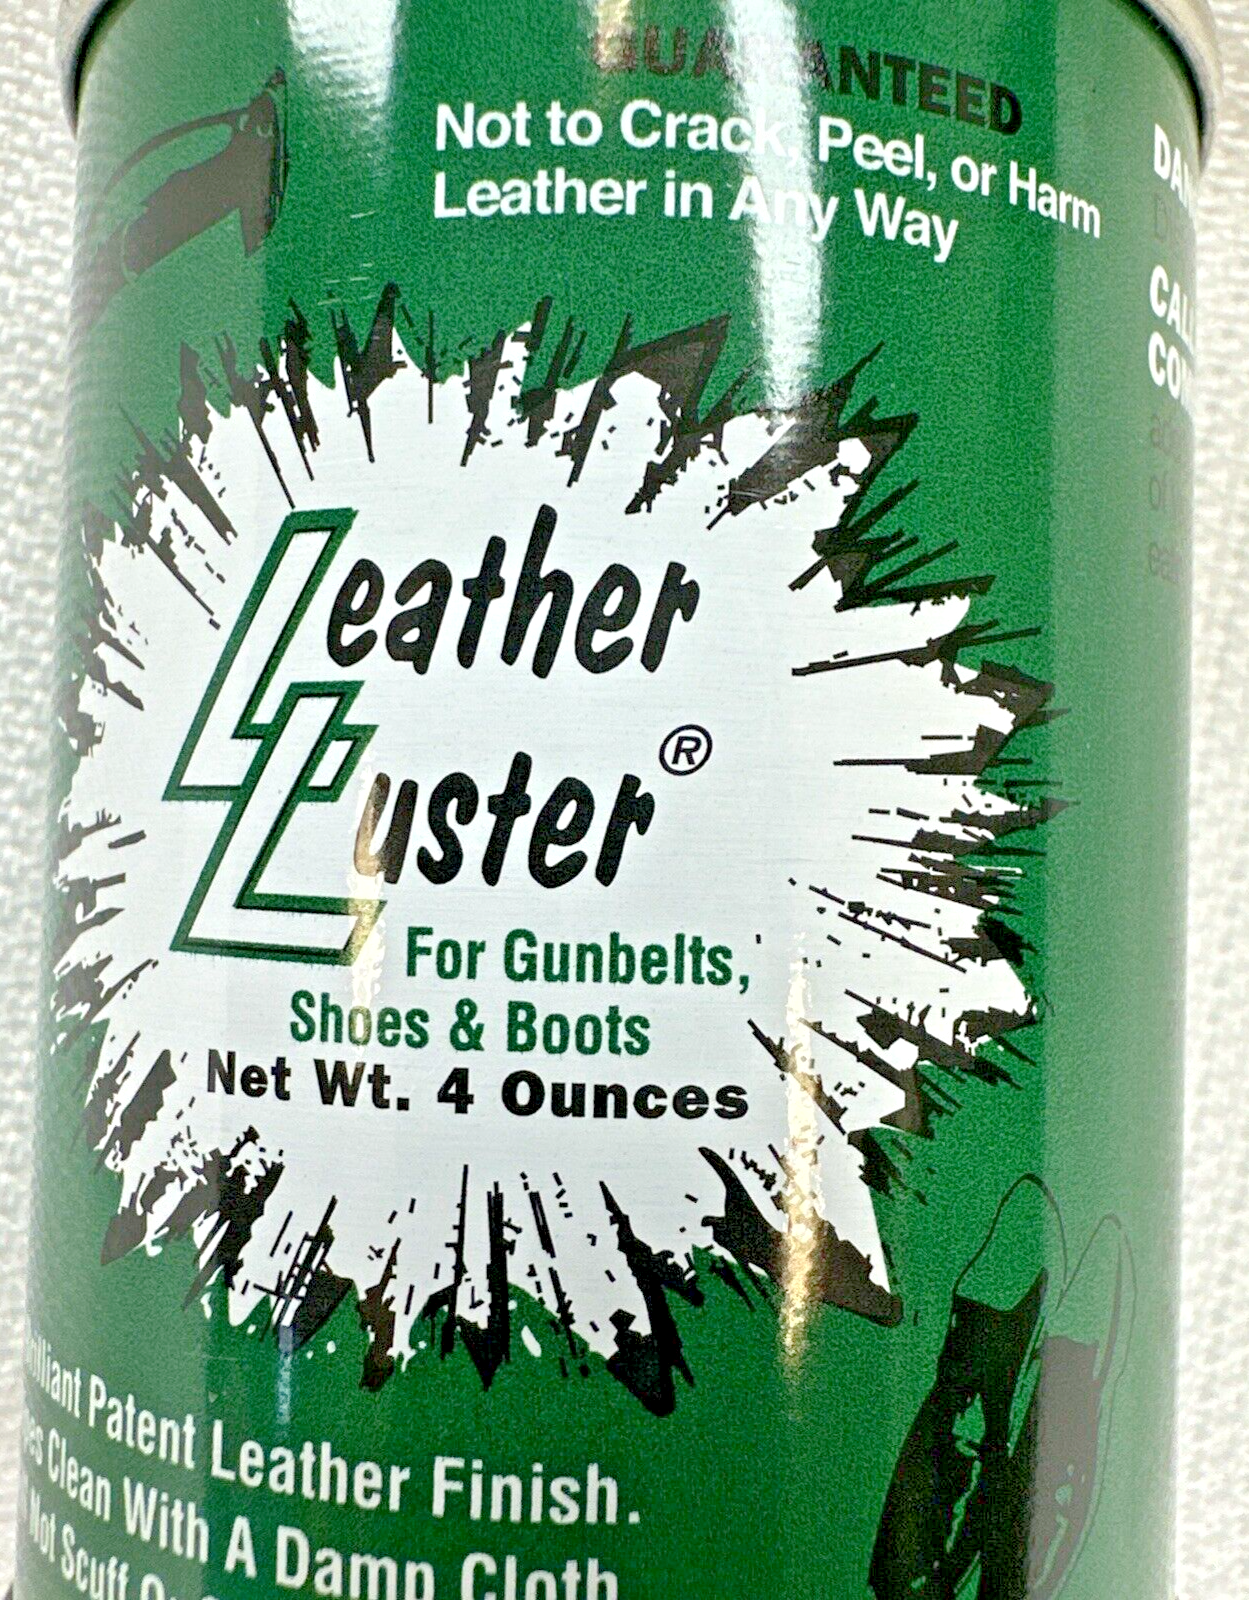 Leather Luster Black Military Polish High Gloss 4 oz for Boots